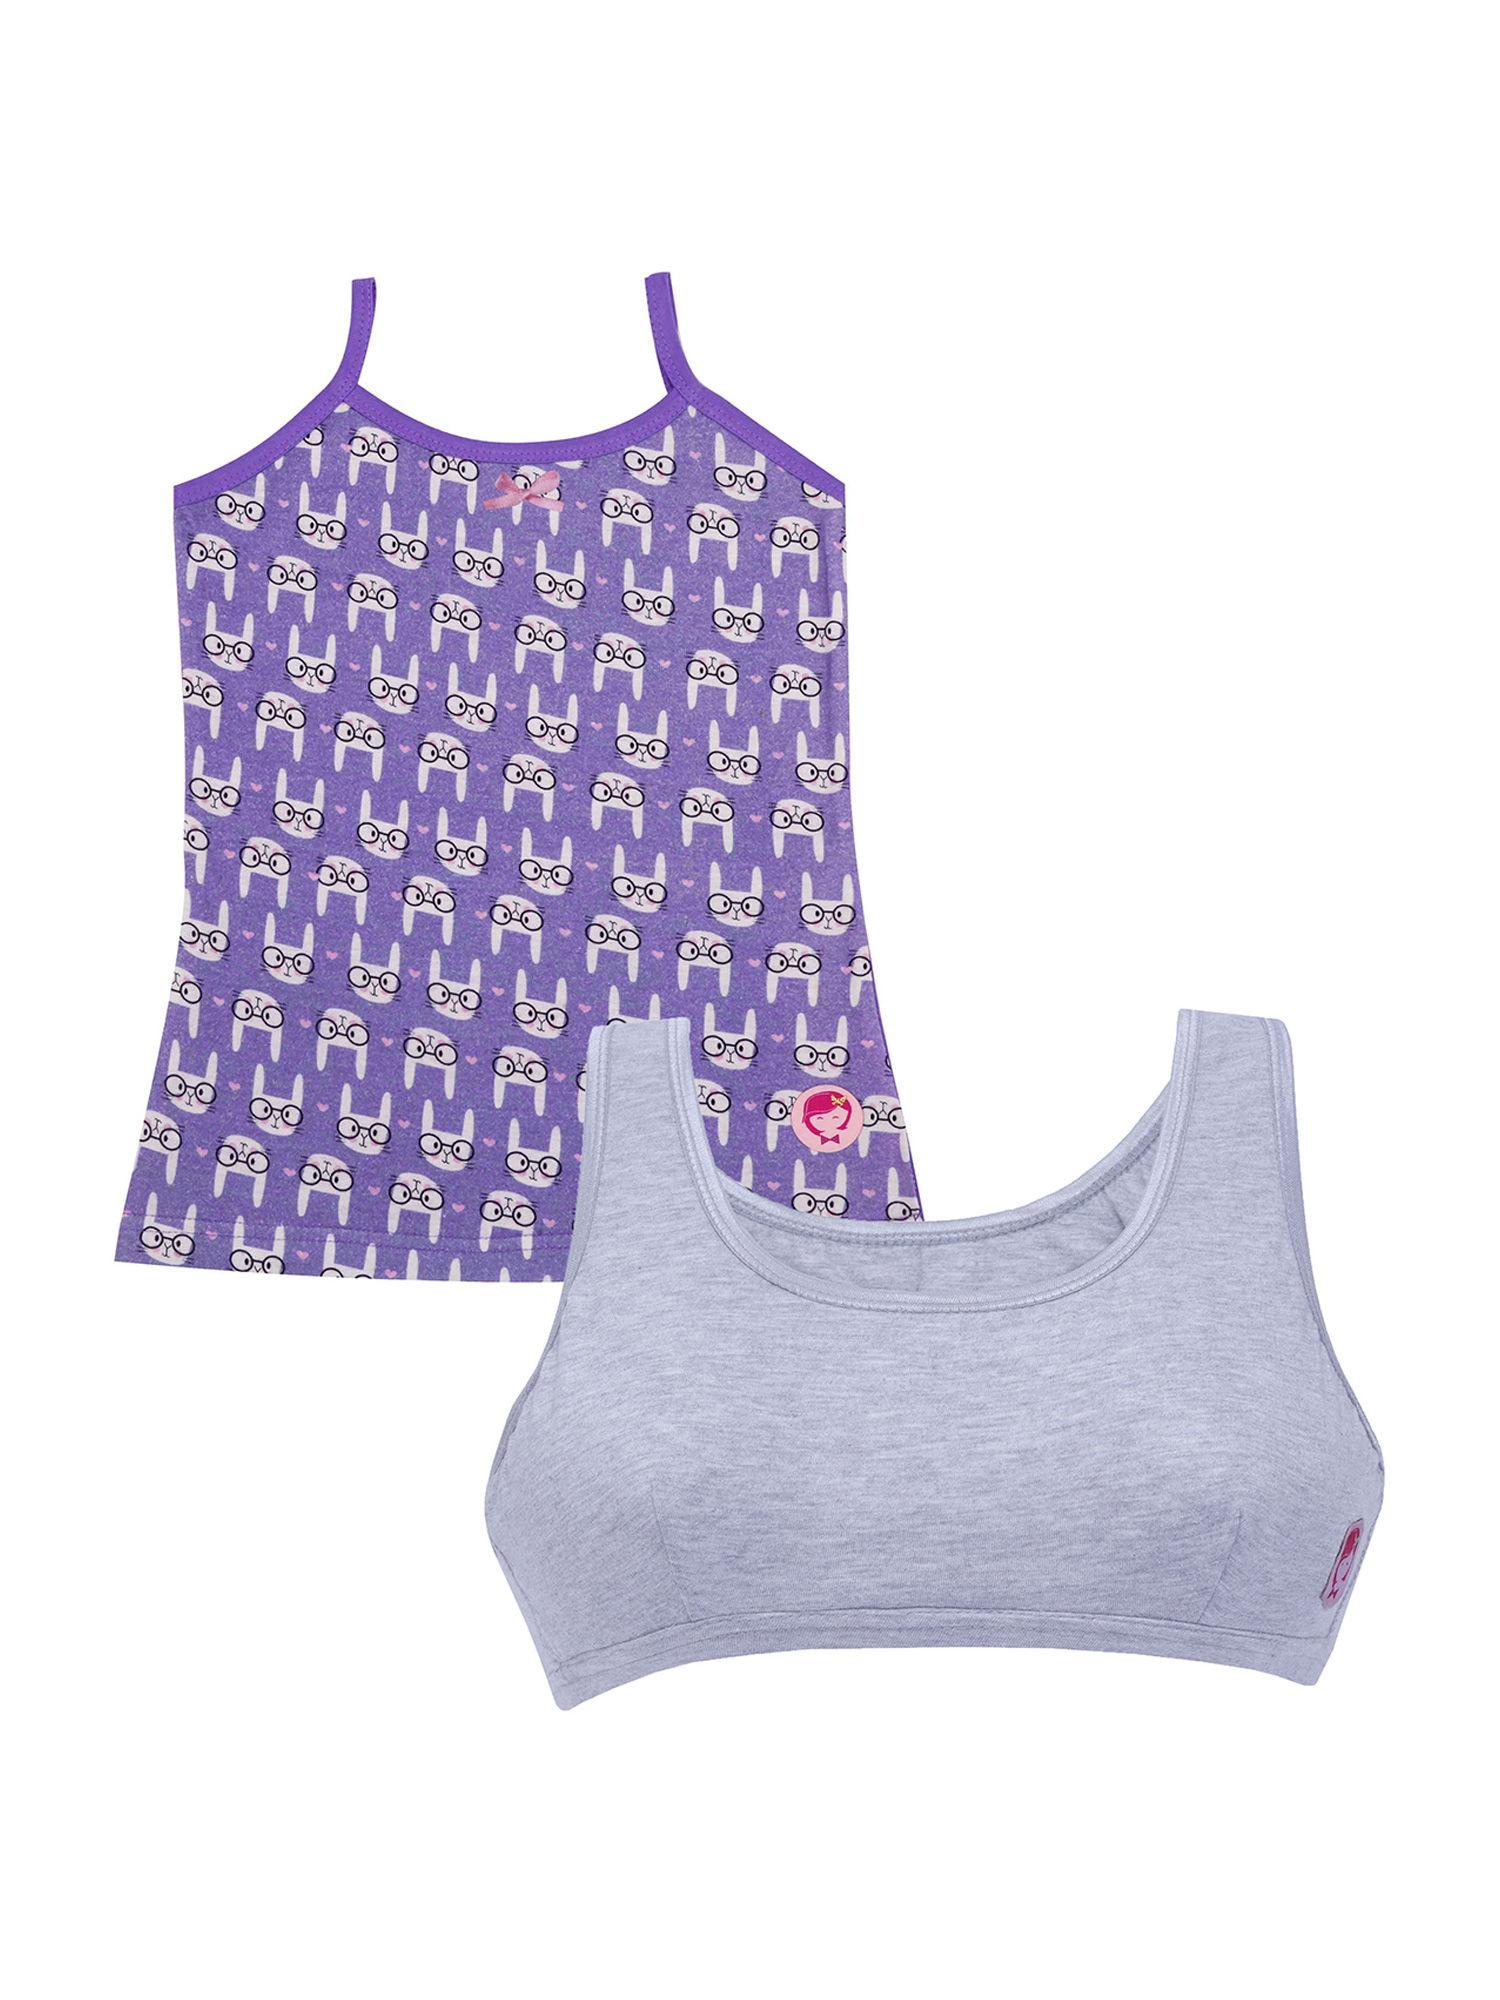 pack-of-2-grey-beginner-bra-and-bunny-print-camisole-slip-for-girls